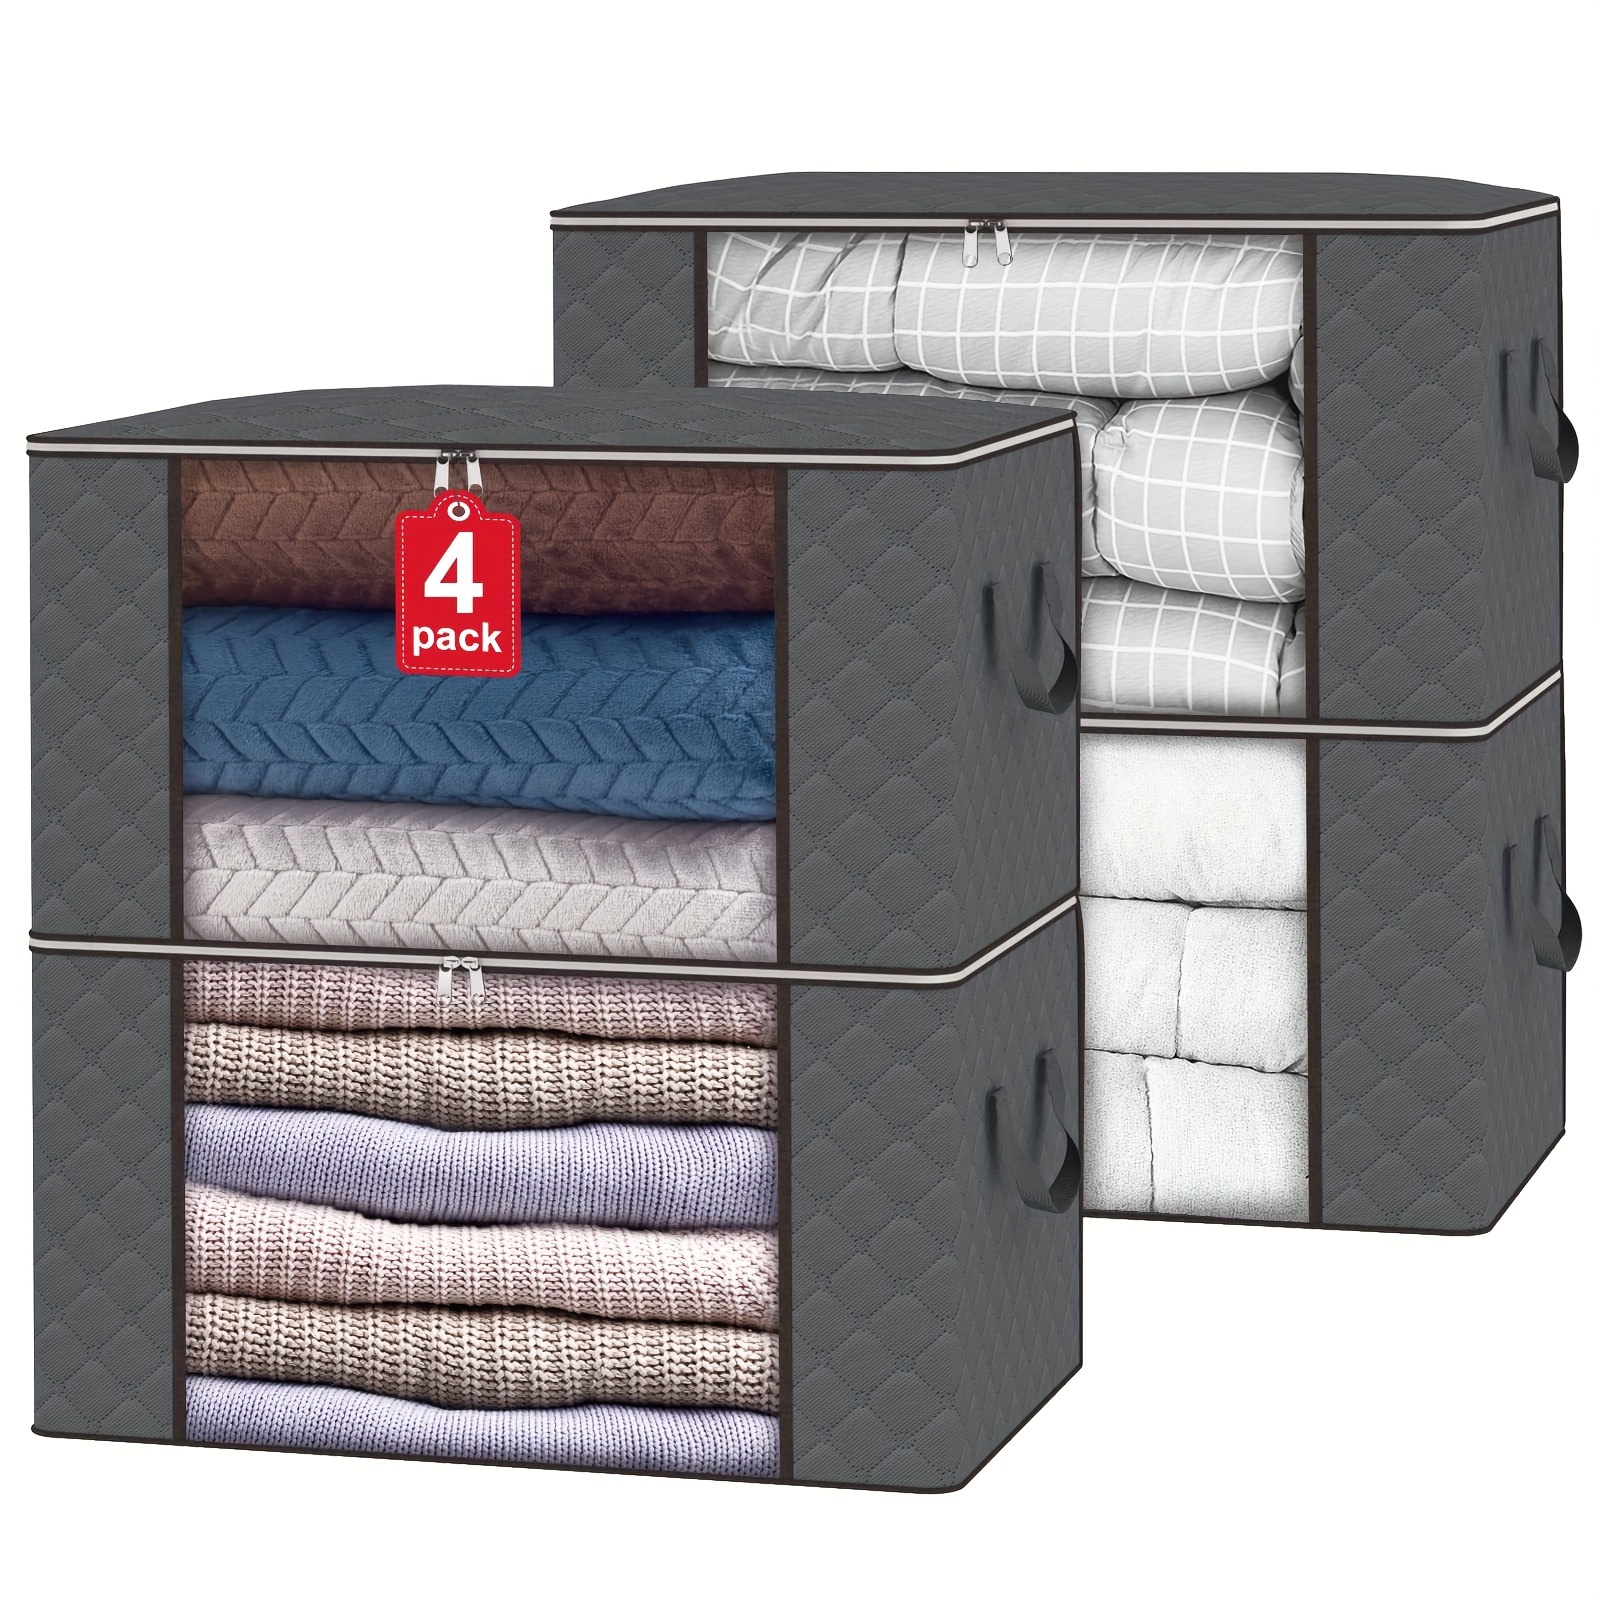 

4 Pcs 90l Blanket Storage Bags With Zipper, Foldable Comforter Bag, Quick Viewing What Are Stored Inside The Container, Large Organizers For Blankets, Pillow, Quilts, Linen, Sturdy Grey